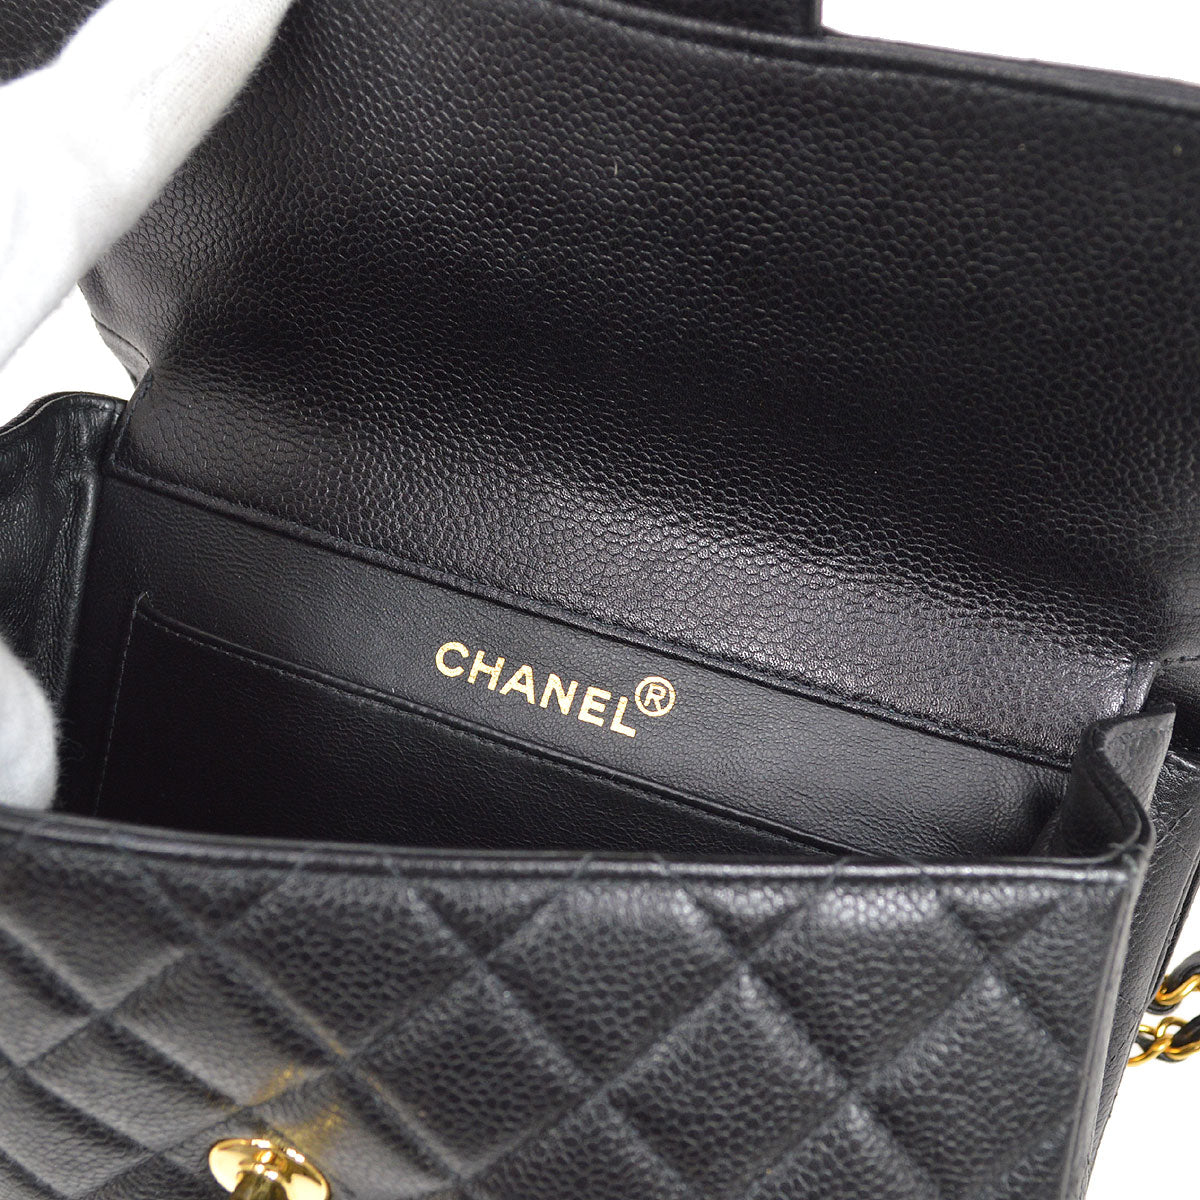 Chanel, a quilted leather handbag, 1996-97. - Bukowskis